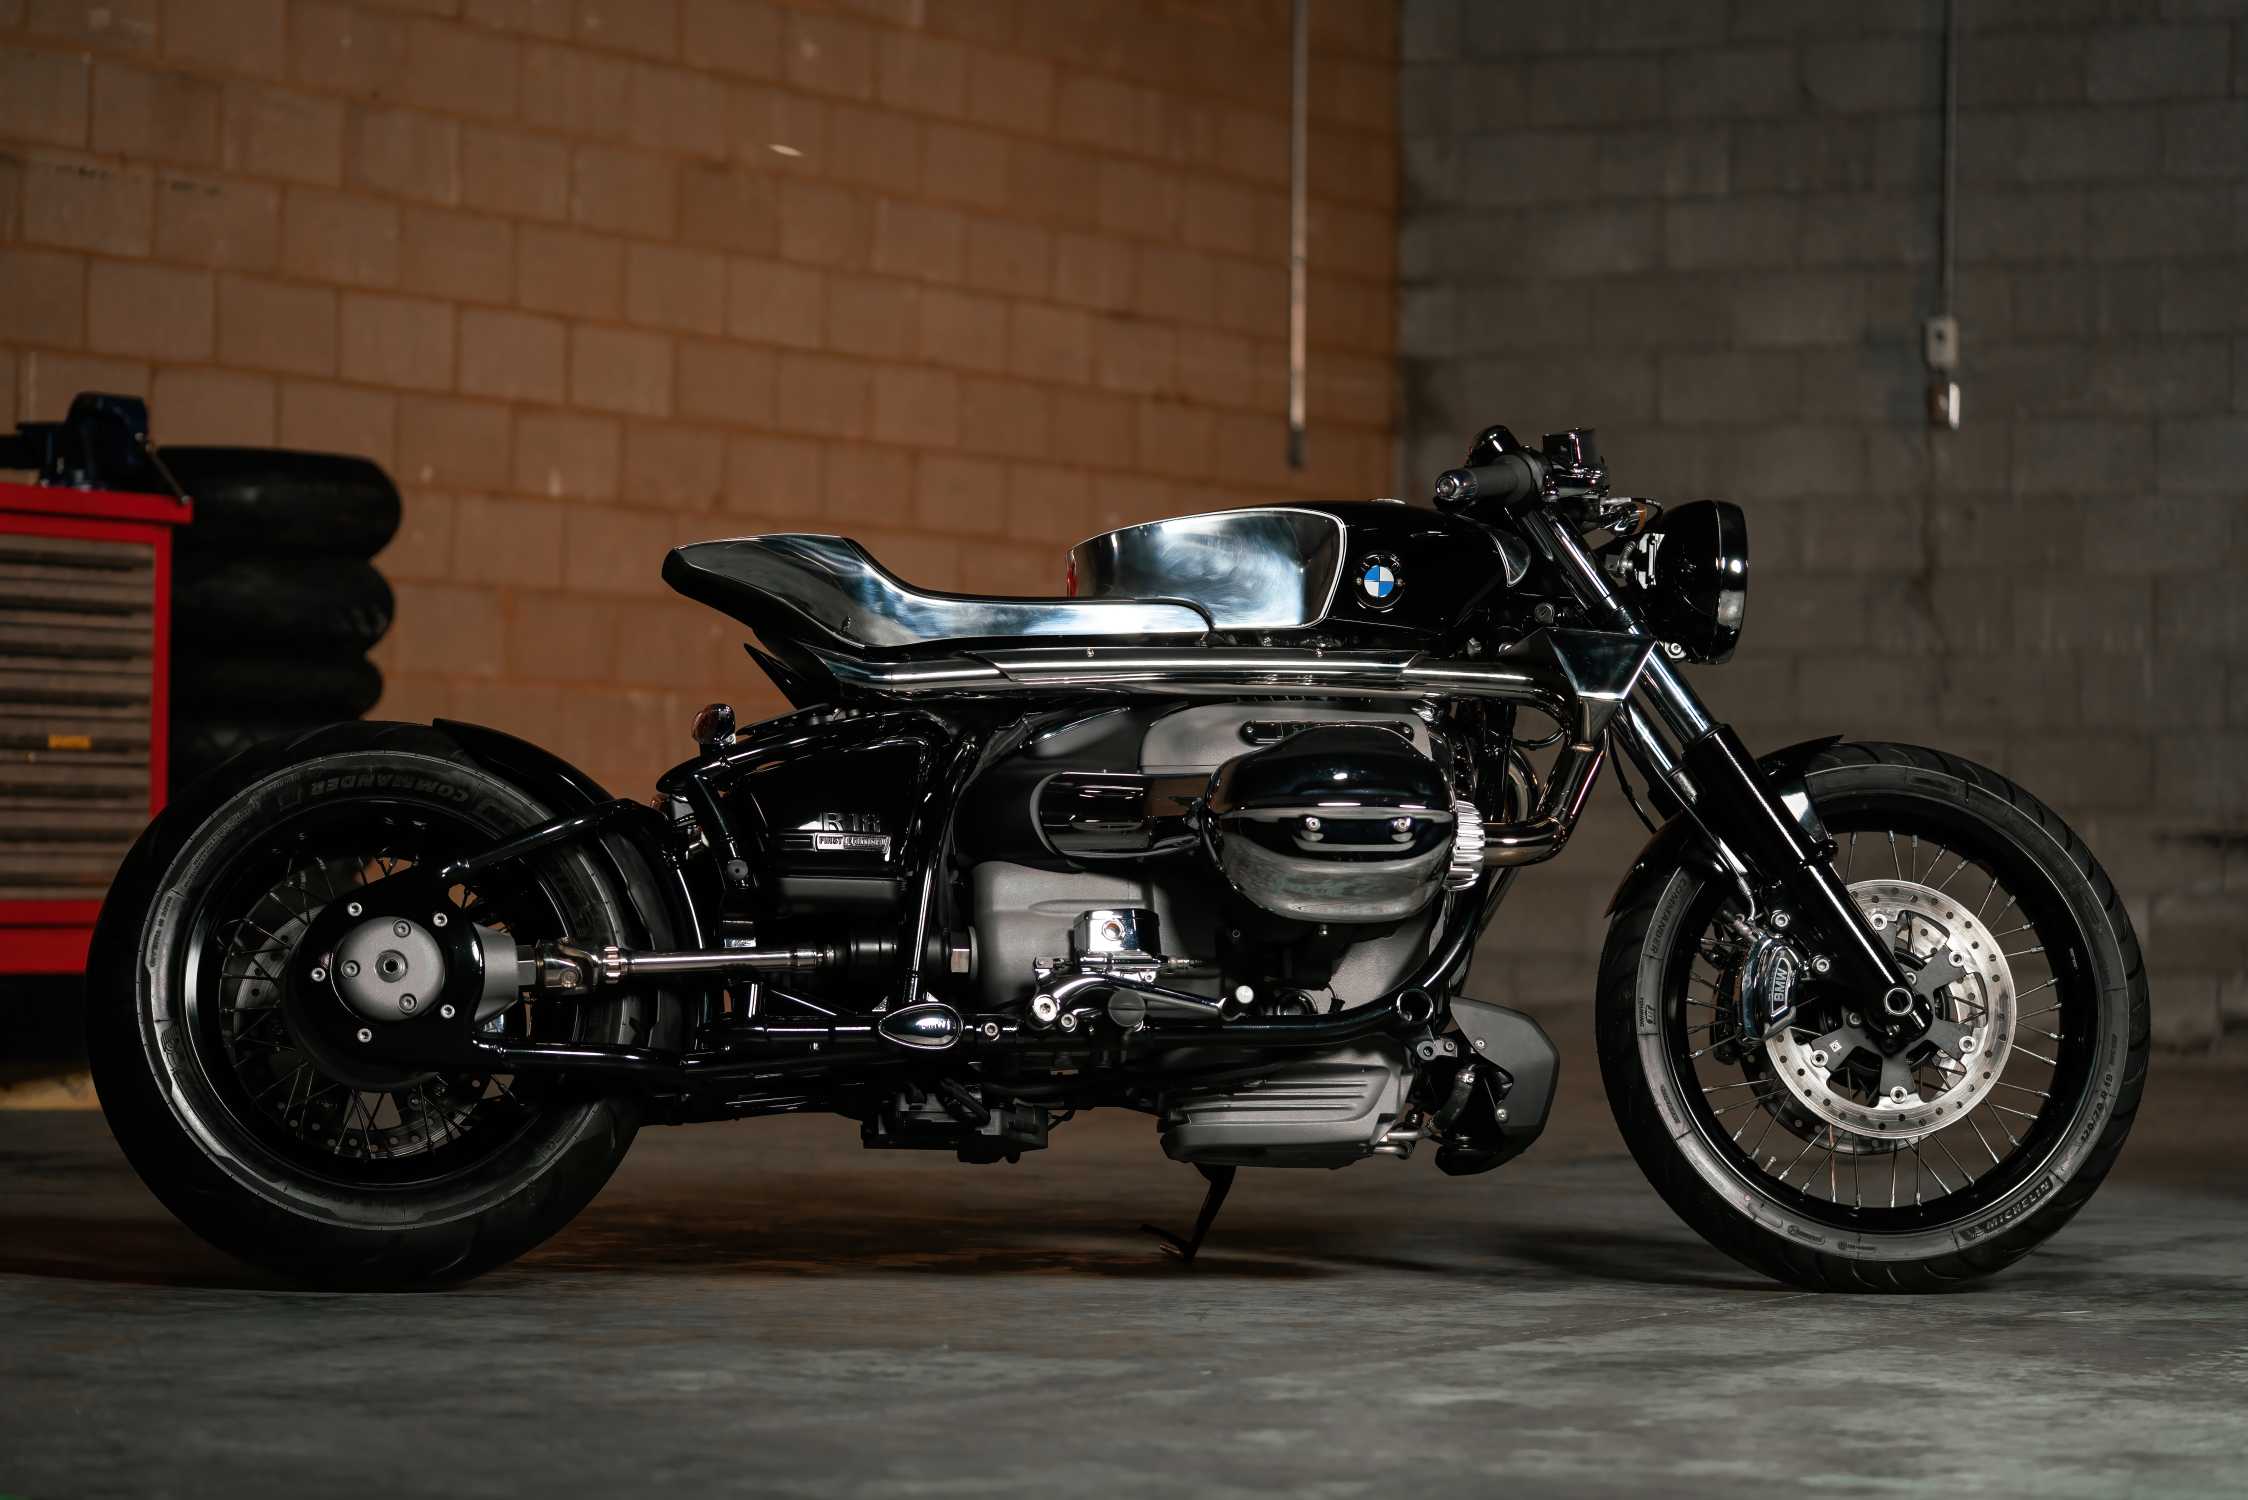 Spectacular BMW R 18 custom motorcycles from Canada. R 18 Future Café by Jay Donovan. (04/2022)